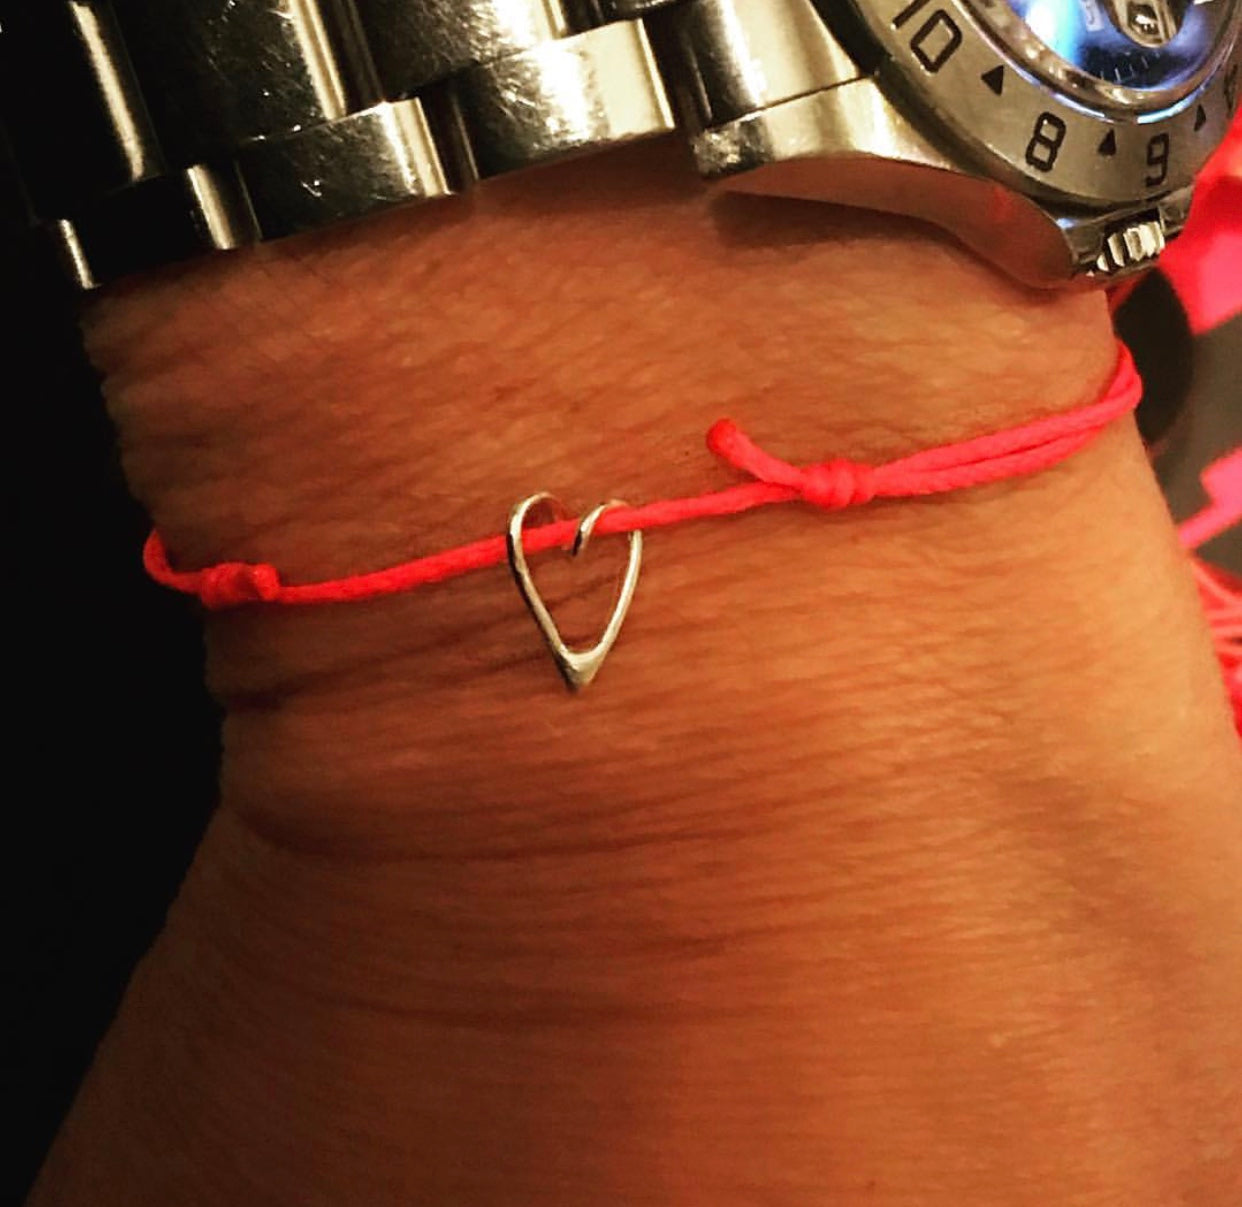 Charity thread bracelet cancer research